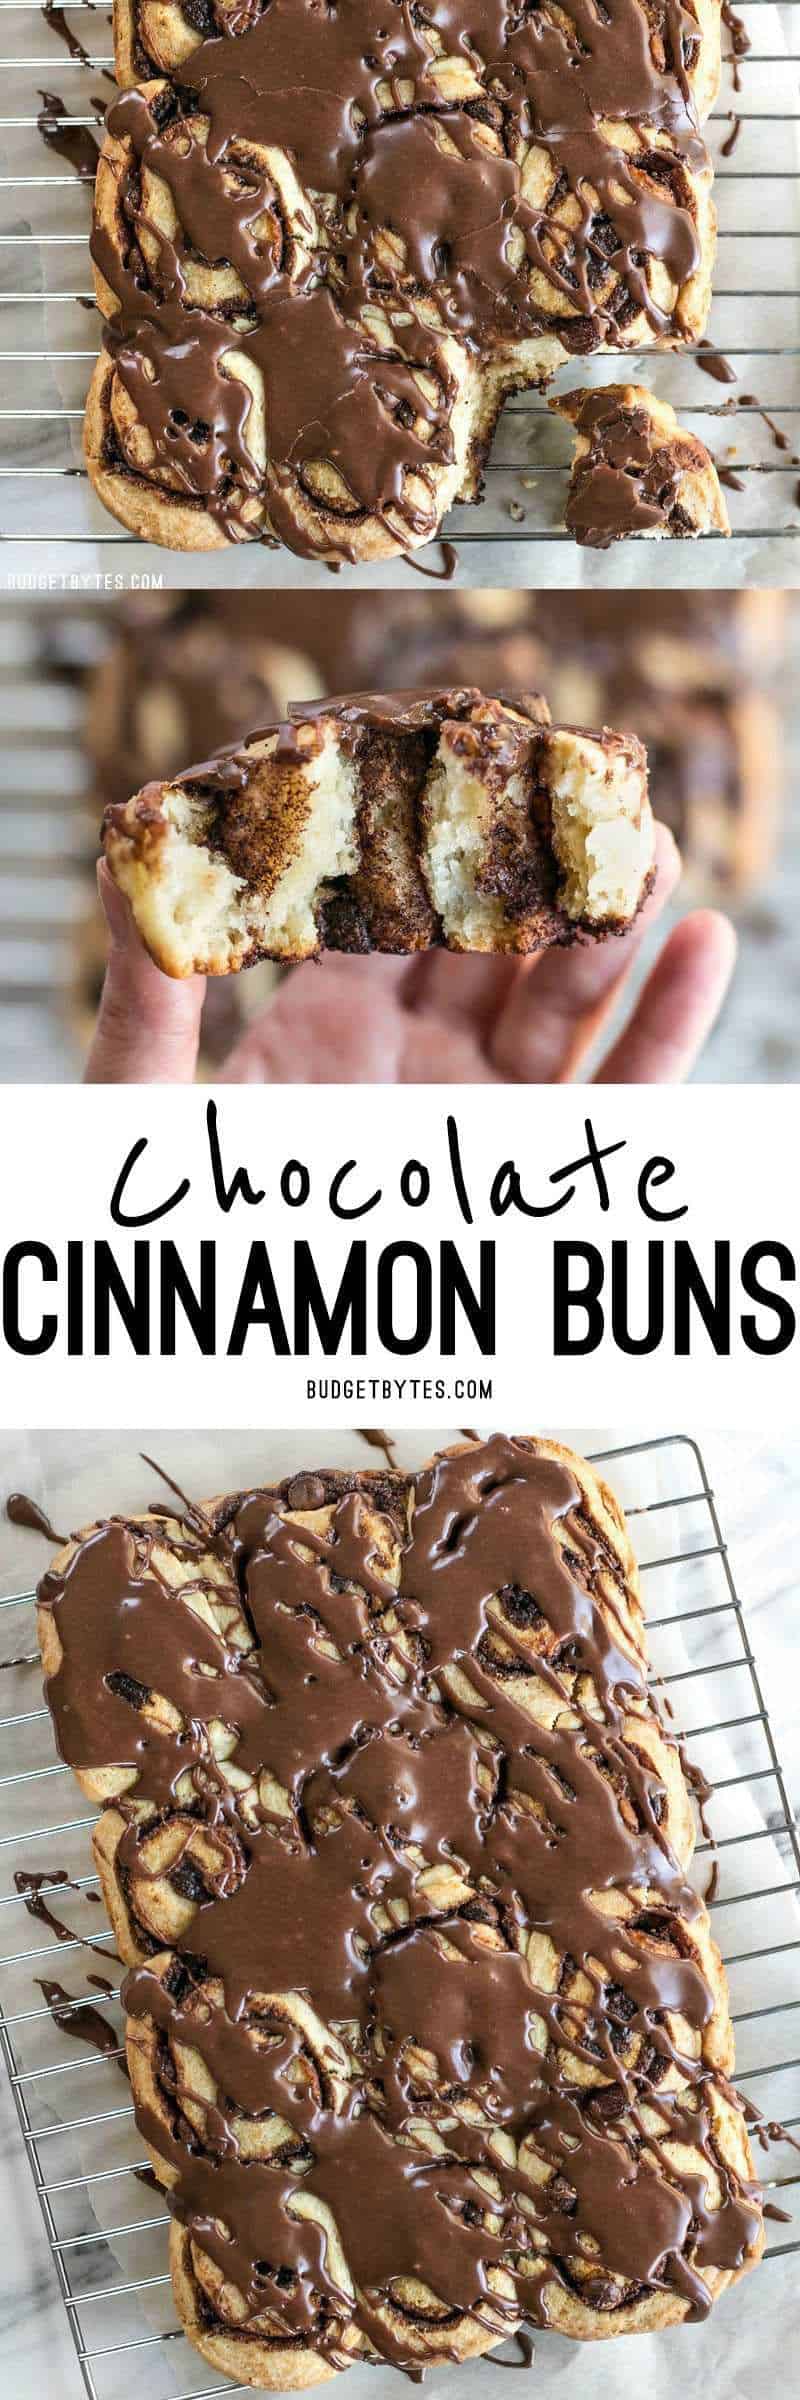 A 5 ingredient dough makes these chocolate cinnamon buns fast, easy, soft, and fluffy. The perfect treat for lazy weekend mornings! BudgetBytes.com